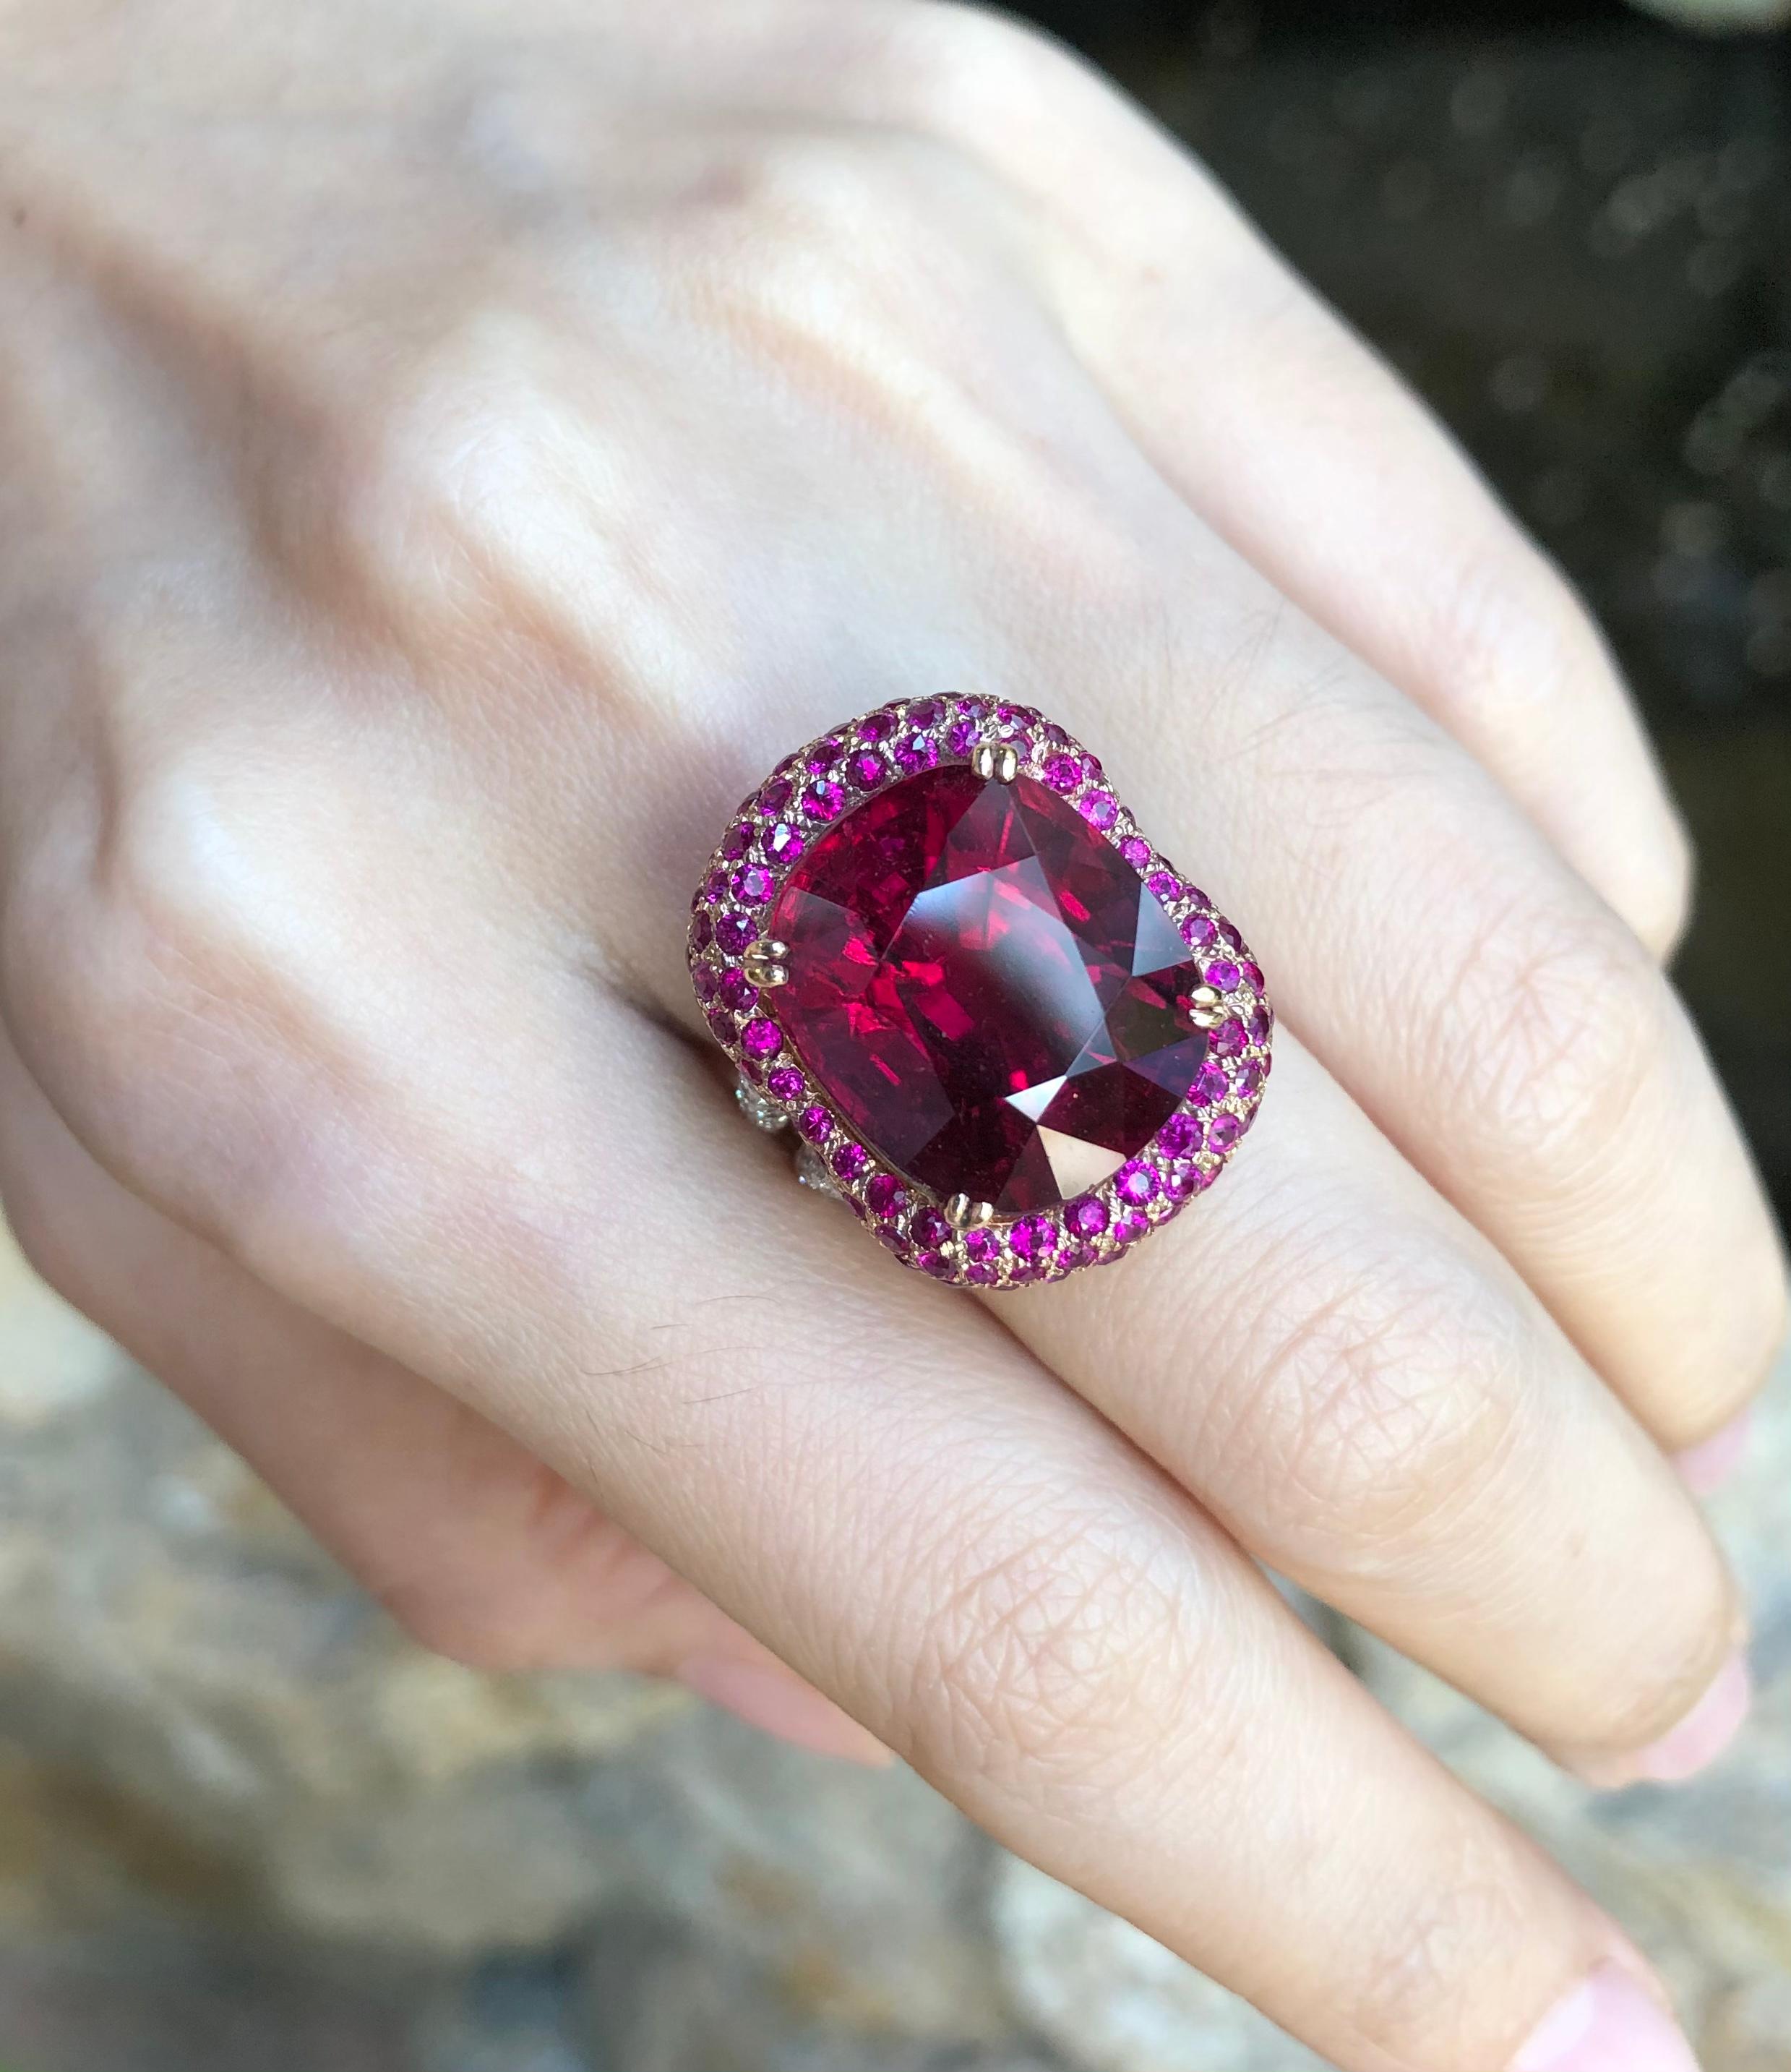 Rubellite 17.18 carats with Ruby 2.82 carats and Diamond 0.55 carat Ring set in 18 Karat White Gold and Rose Gold Settings

Width:  1.6 cm 
Length:  2.1 cm
Ring Size: 51
Total Weight: 14.94 grams

